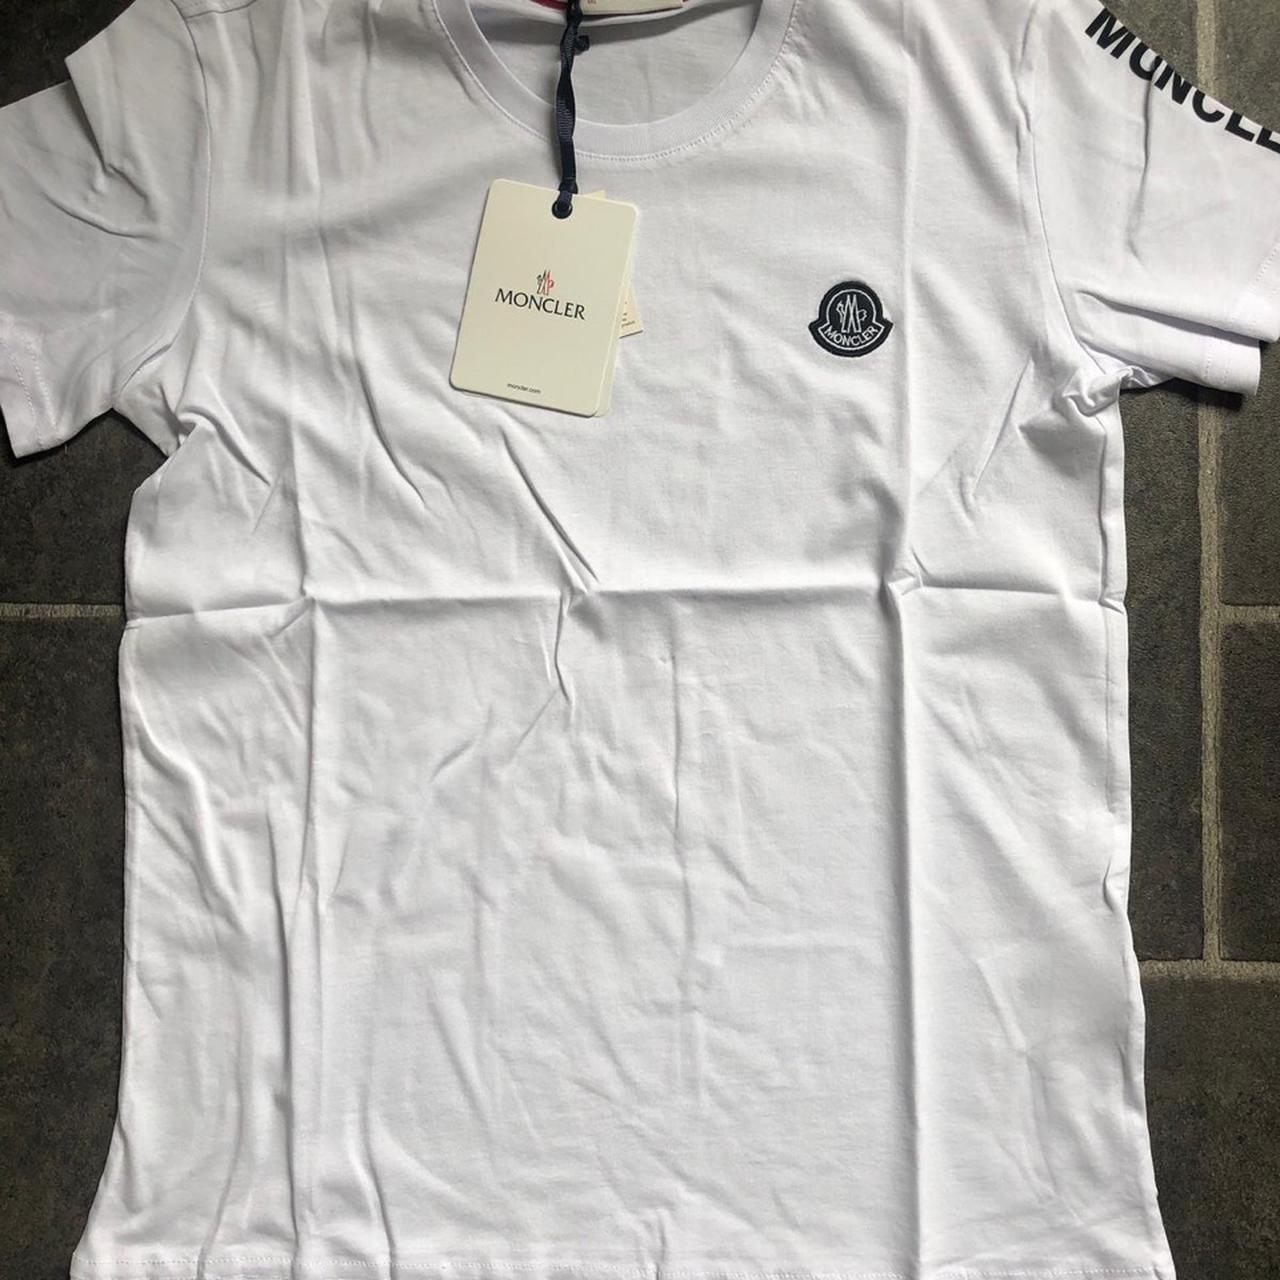 Louis Vuitton Half and Half Galaxy T-Shirt available - Depop